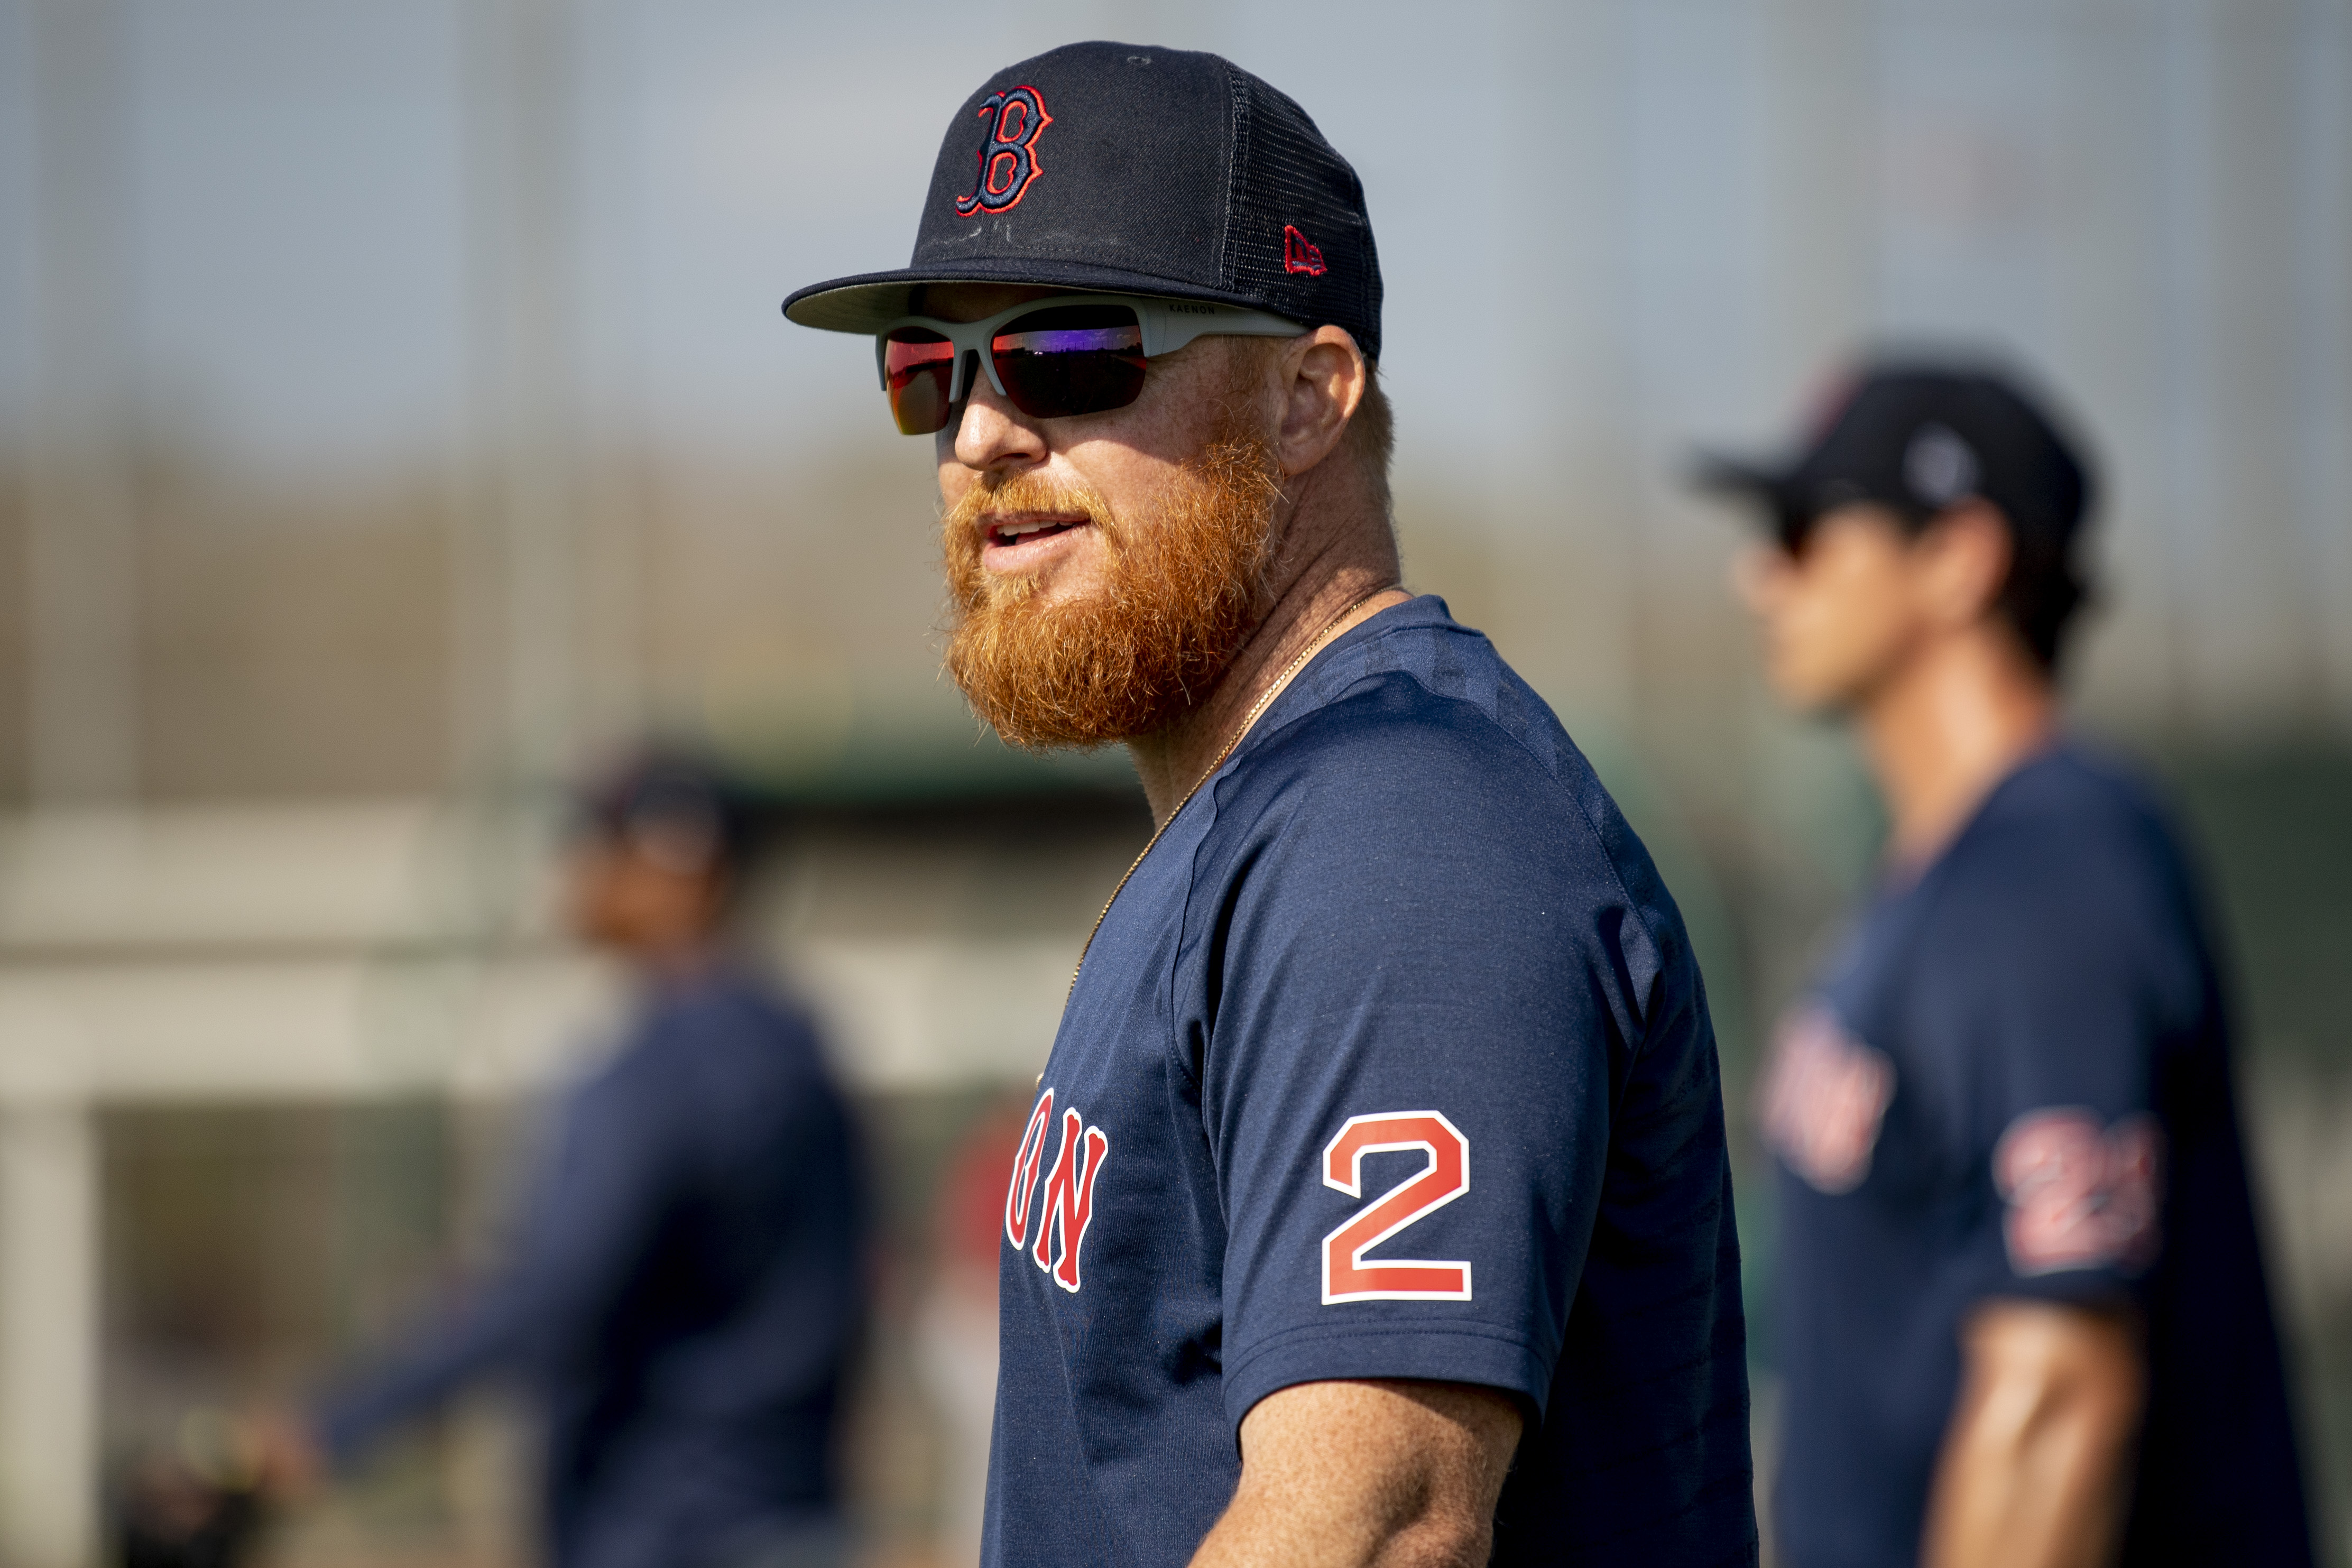 Justin Turner injury: Red Sox 1B/DH exits game after being hit in